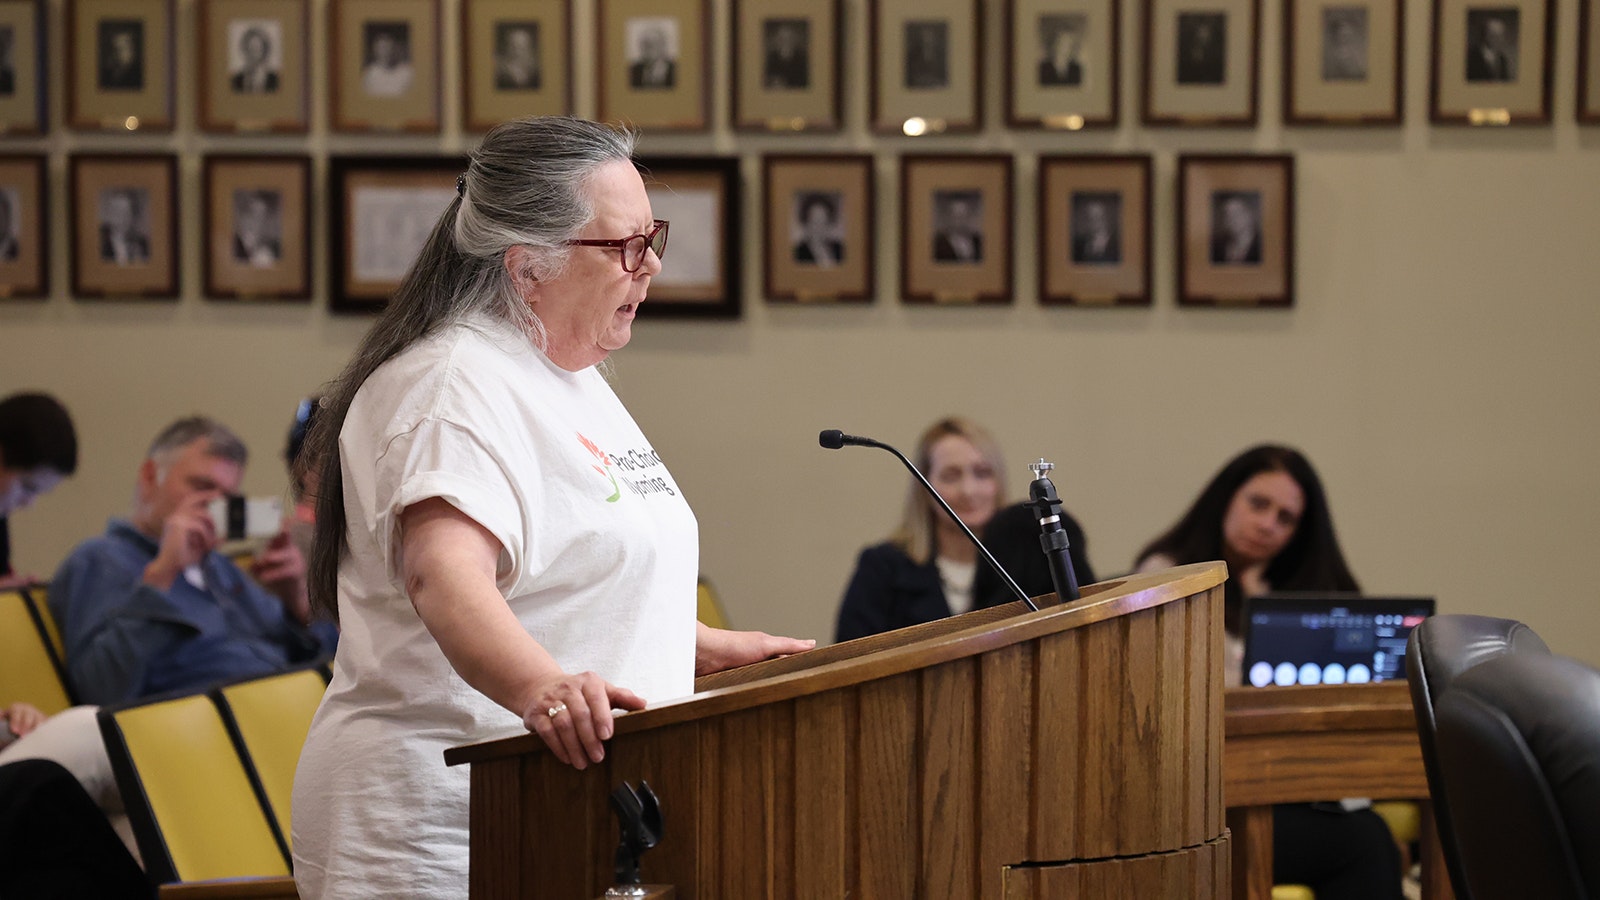 Jane Ifland of Casper talks to the Casper City Council on Tuesday, calling out Mayor Bruce Knell over a controversial social media post he made.